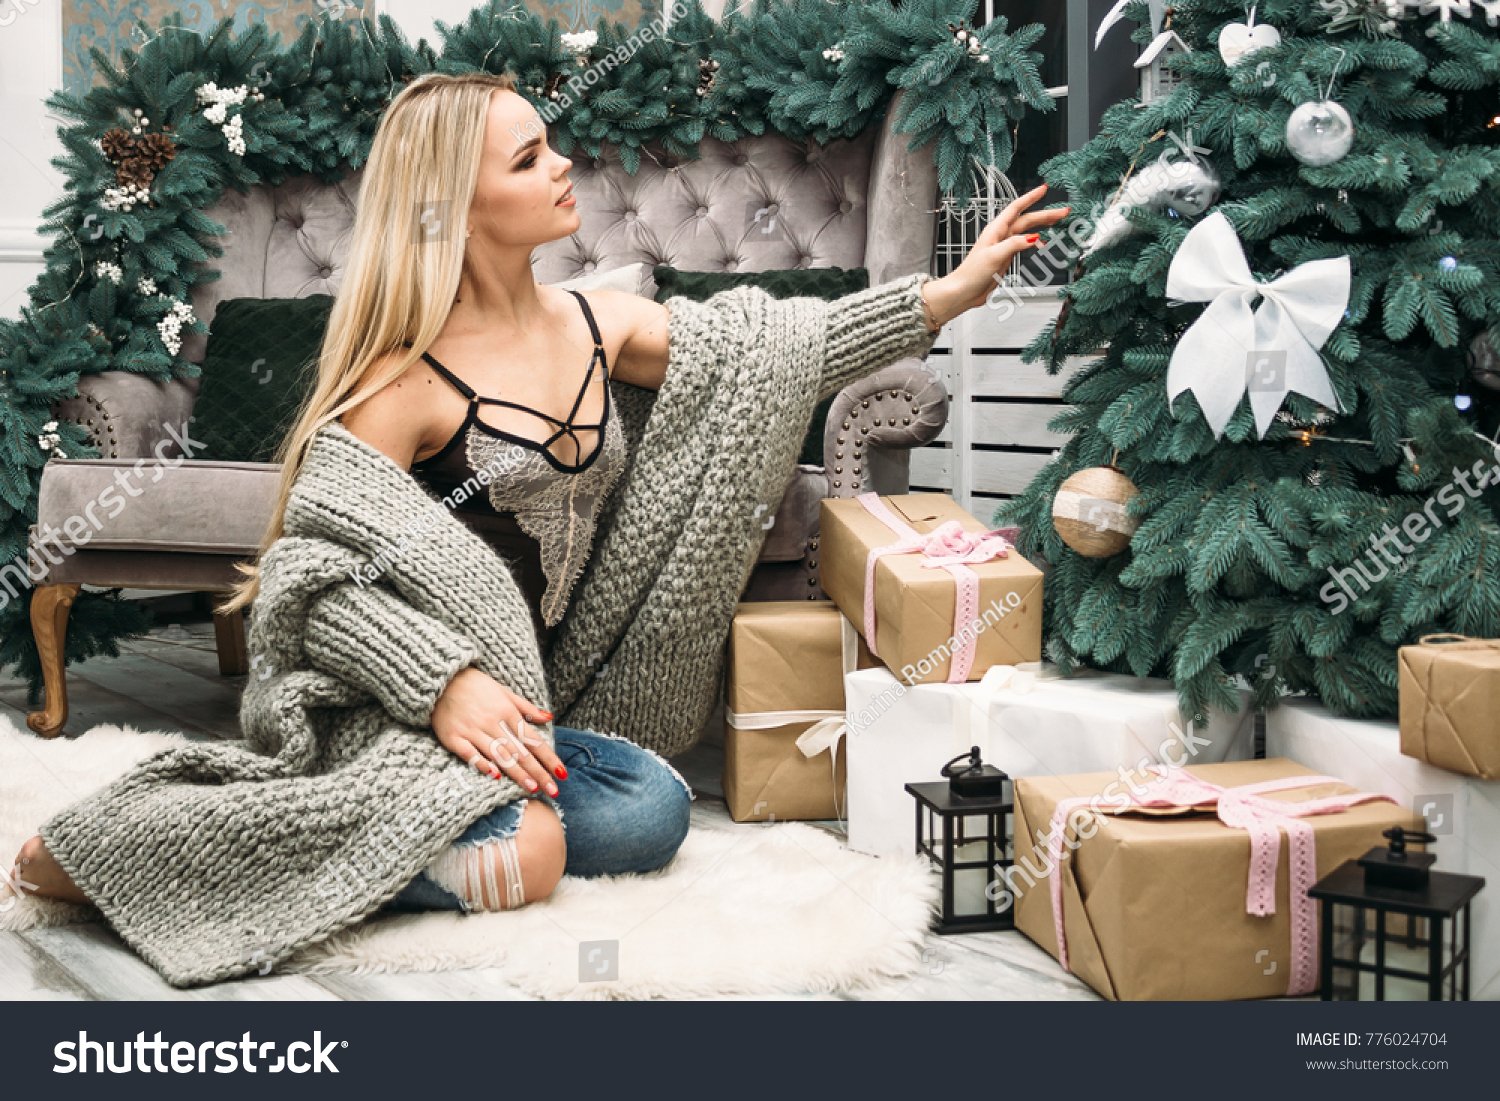 christmas. new year 2018. girl in christmas. girl in lingerie and sweater. a girl in a knitted sweater. girl in a gray sweater #776024704